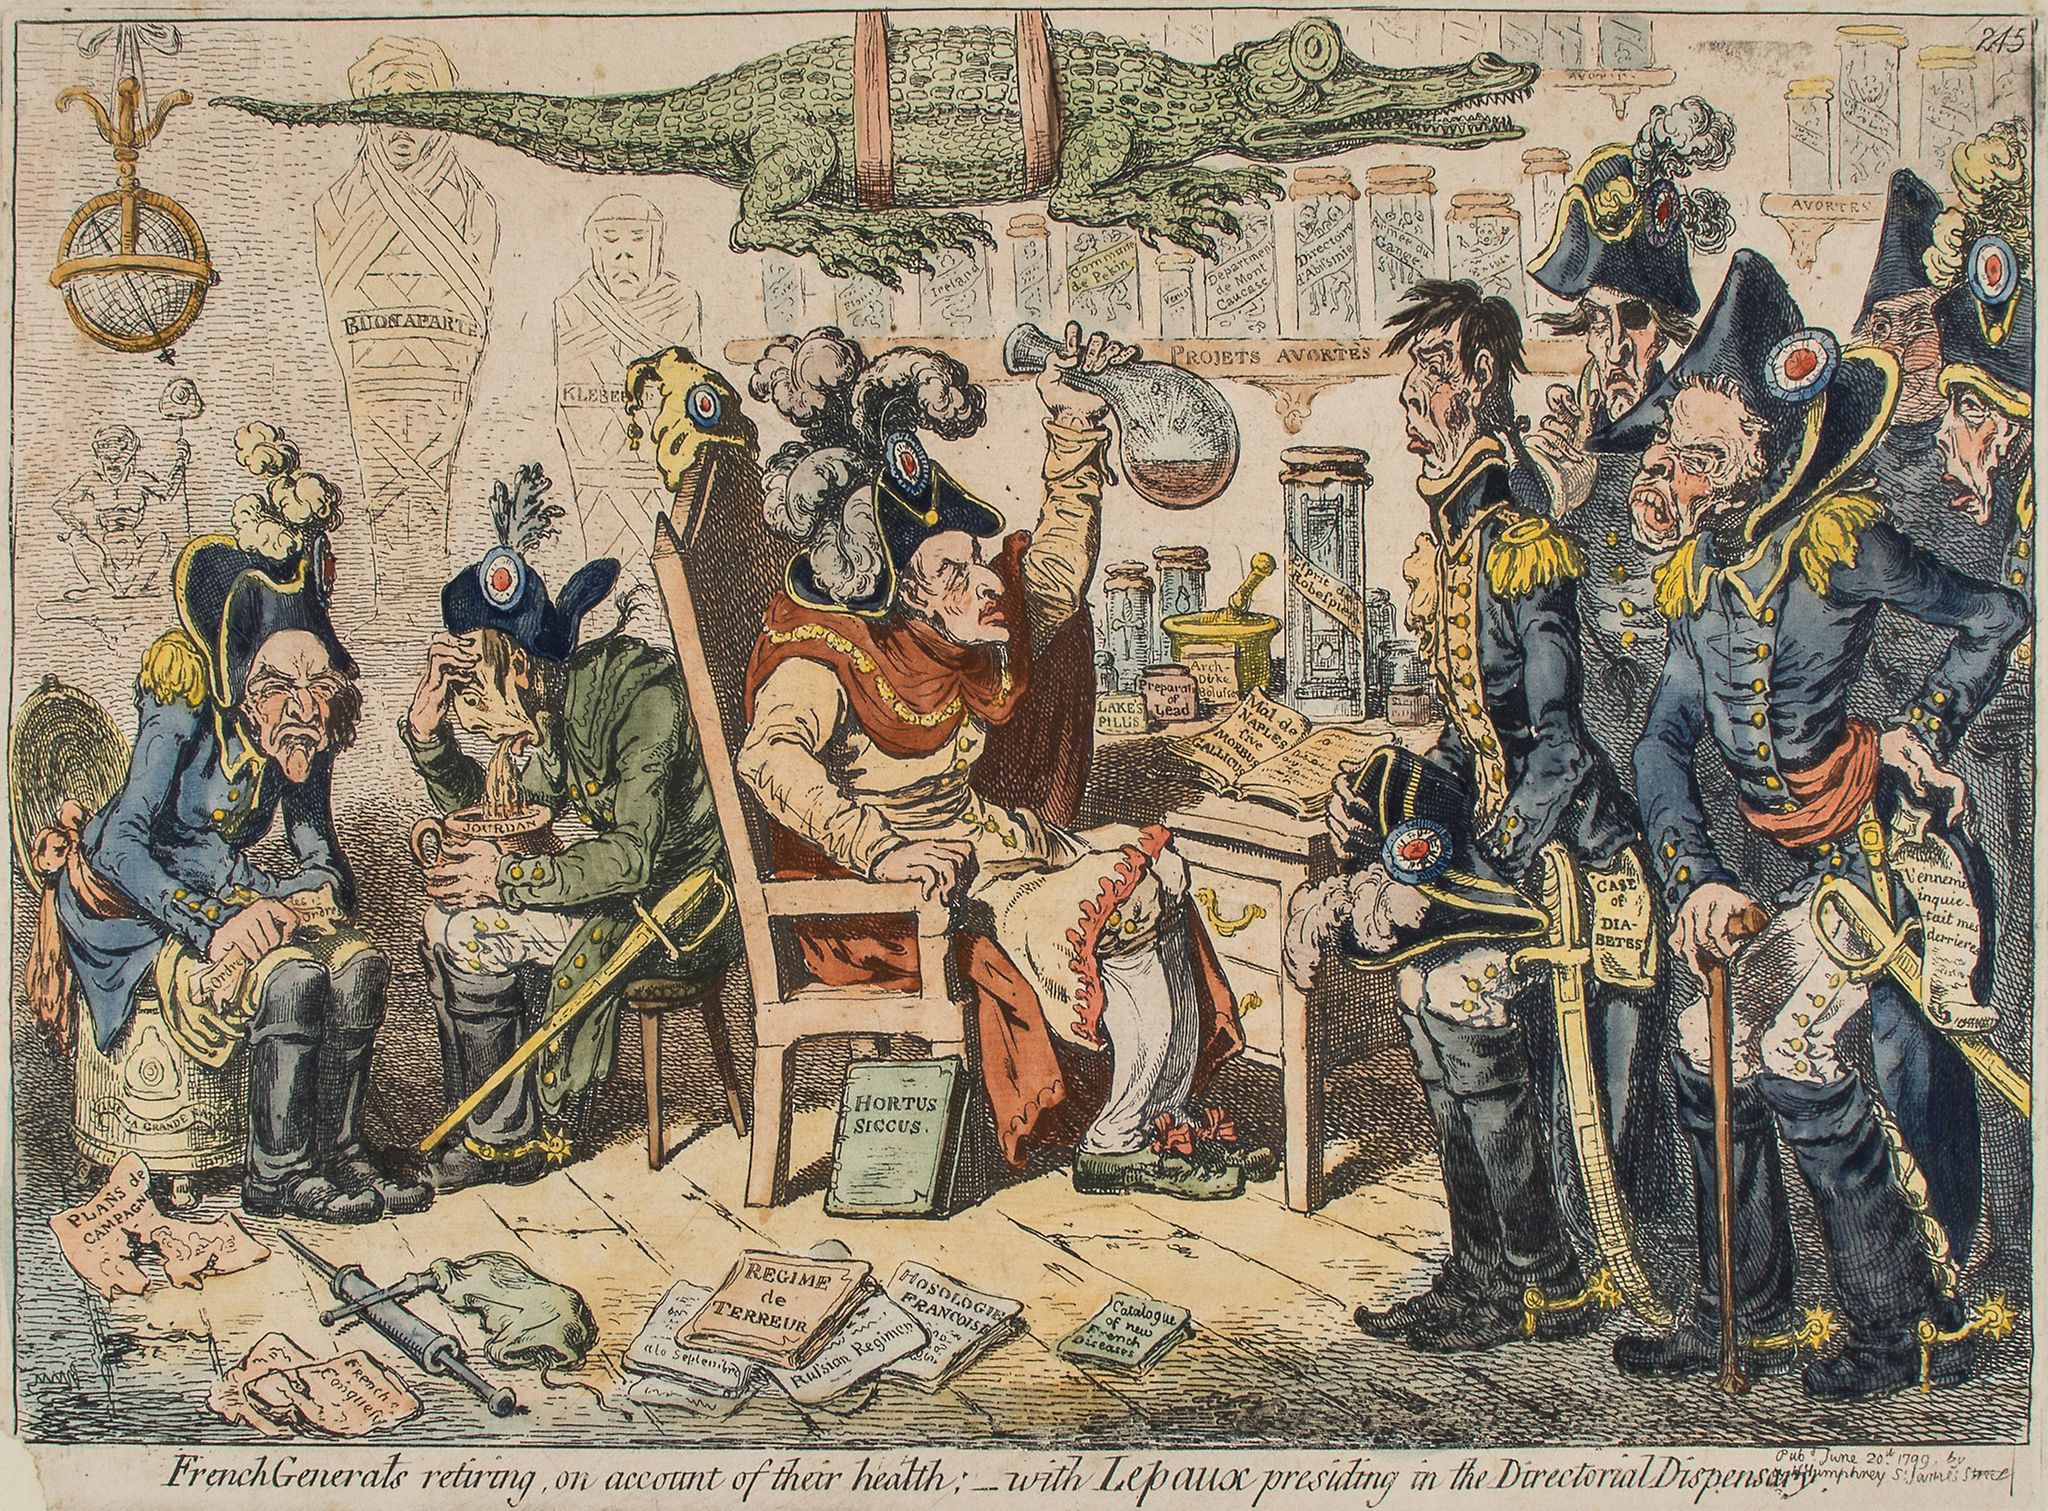 Cruikshank (Isaac) - The French Bugabo Frightening the Royal Commanders, a barely recognisable - Image 2 of 3